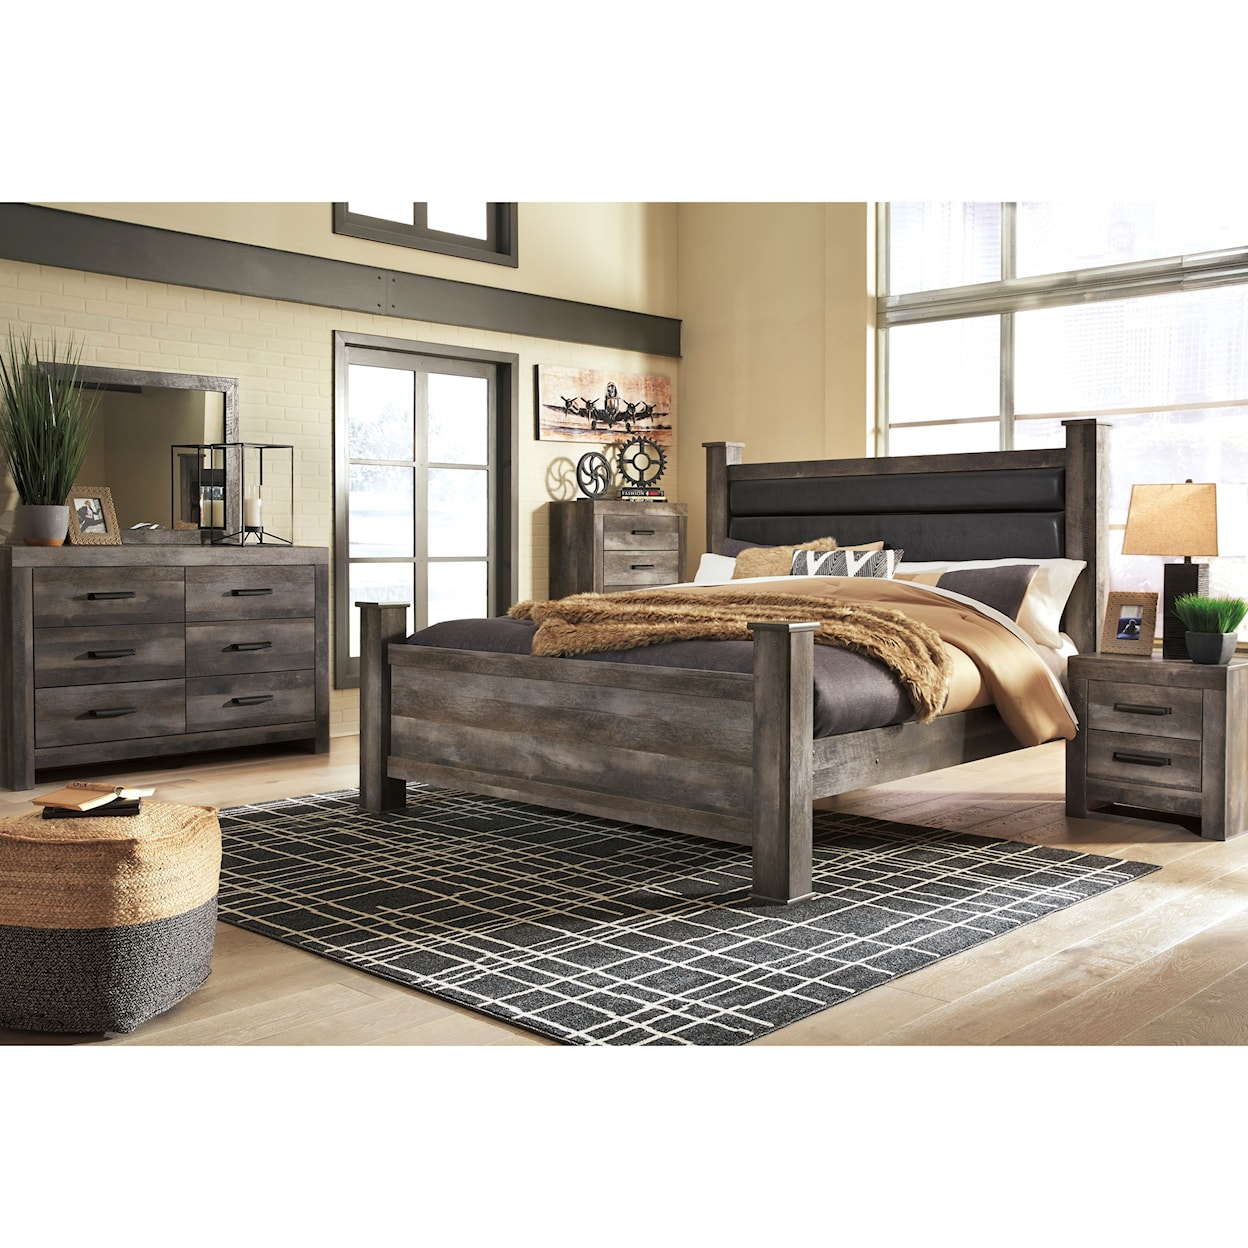 Signature Design by Ashley Furniture Wynnlow King Bedroom Group